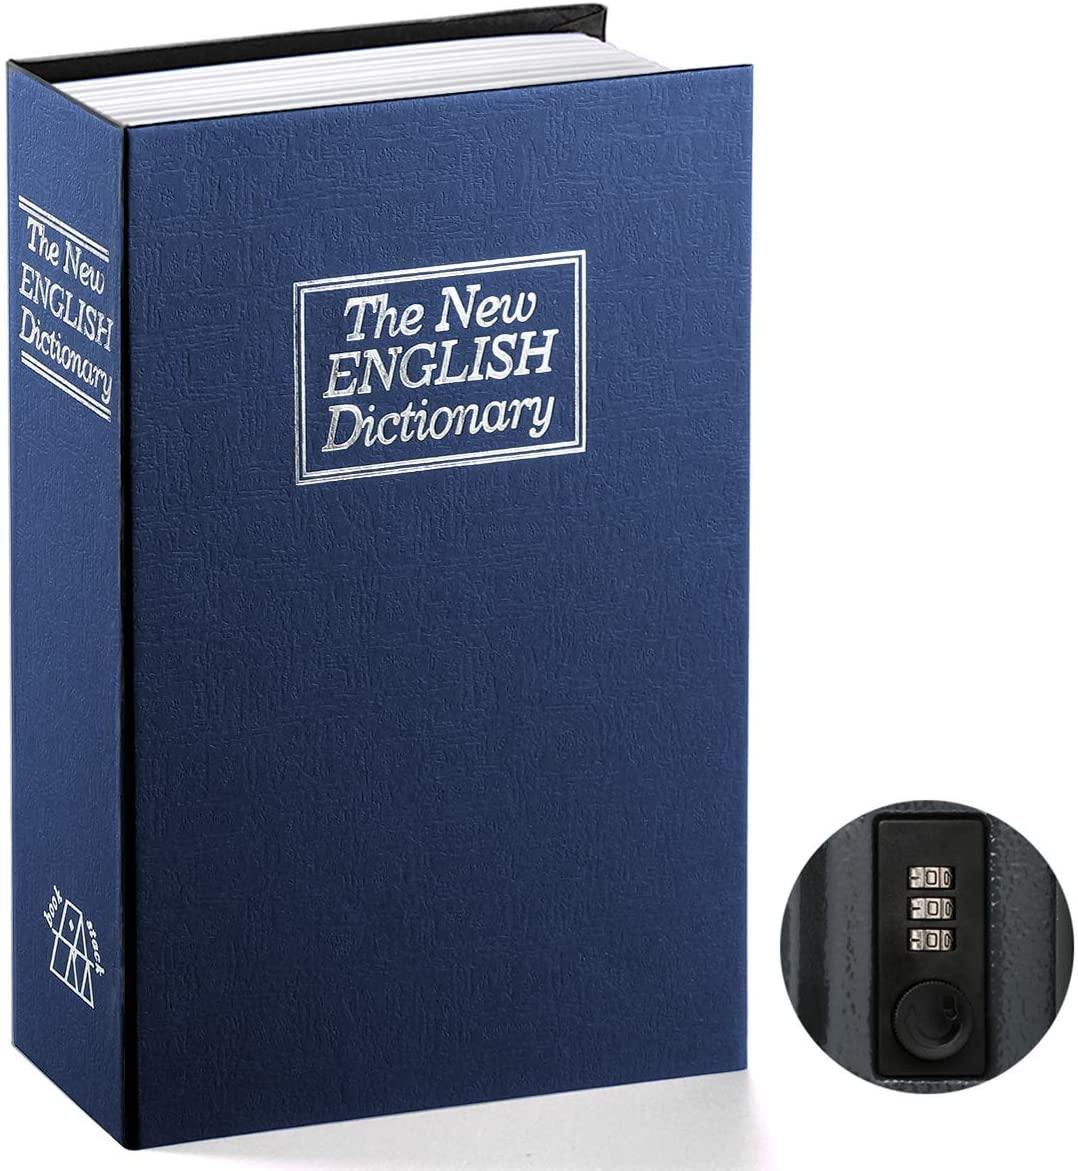 Dictionary Book Safe With Password lock PG14193